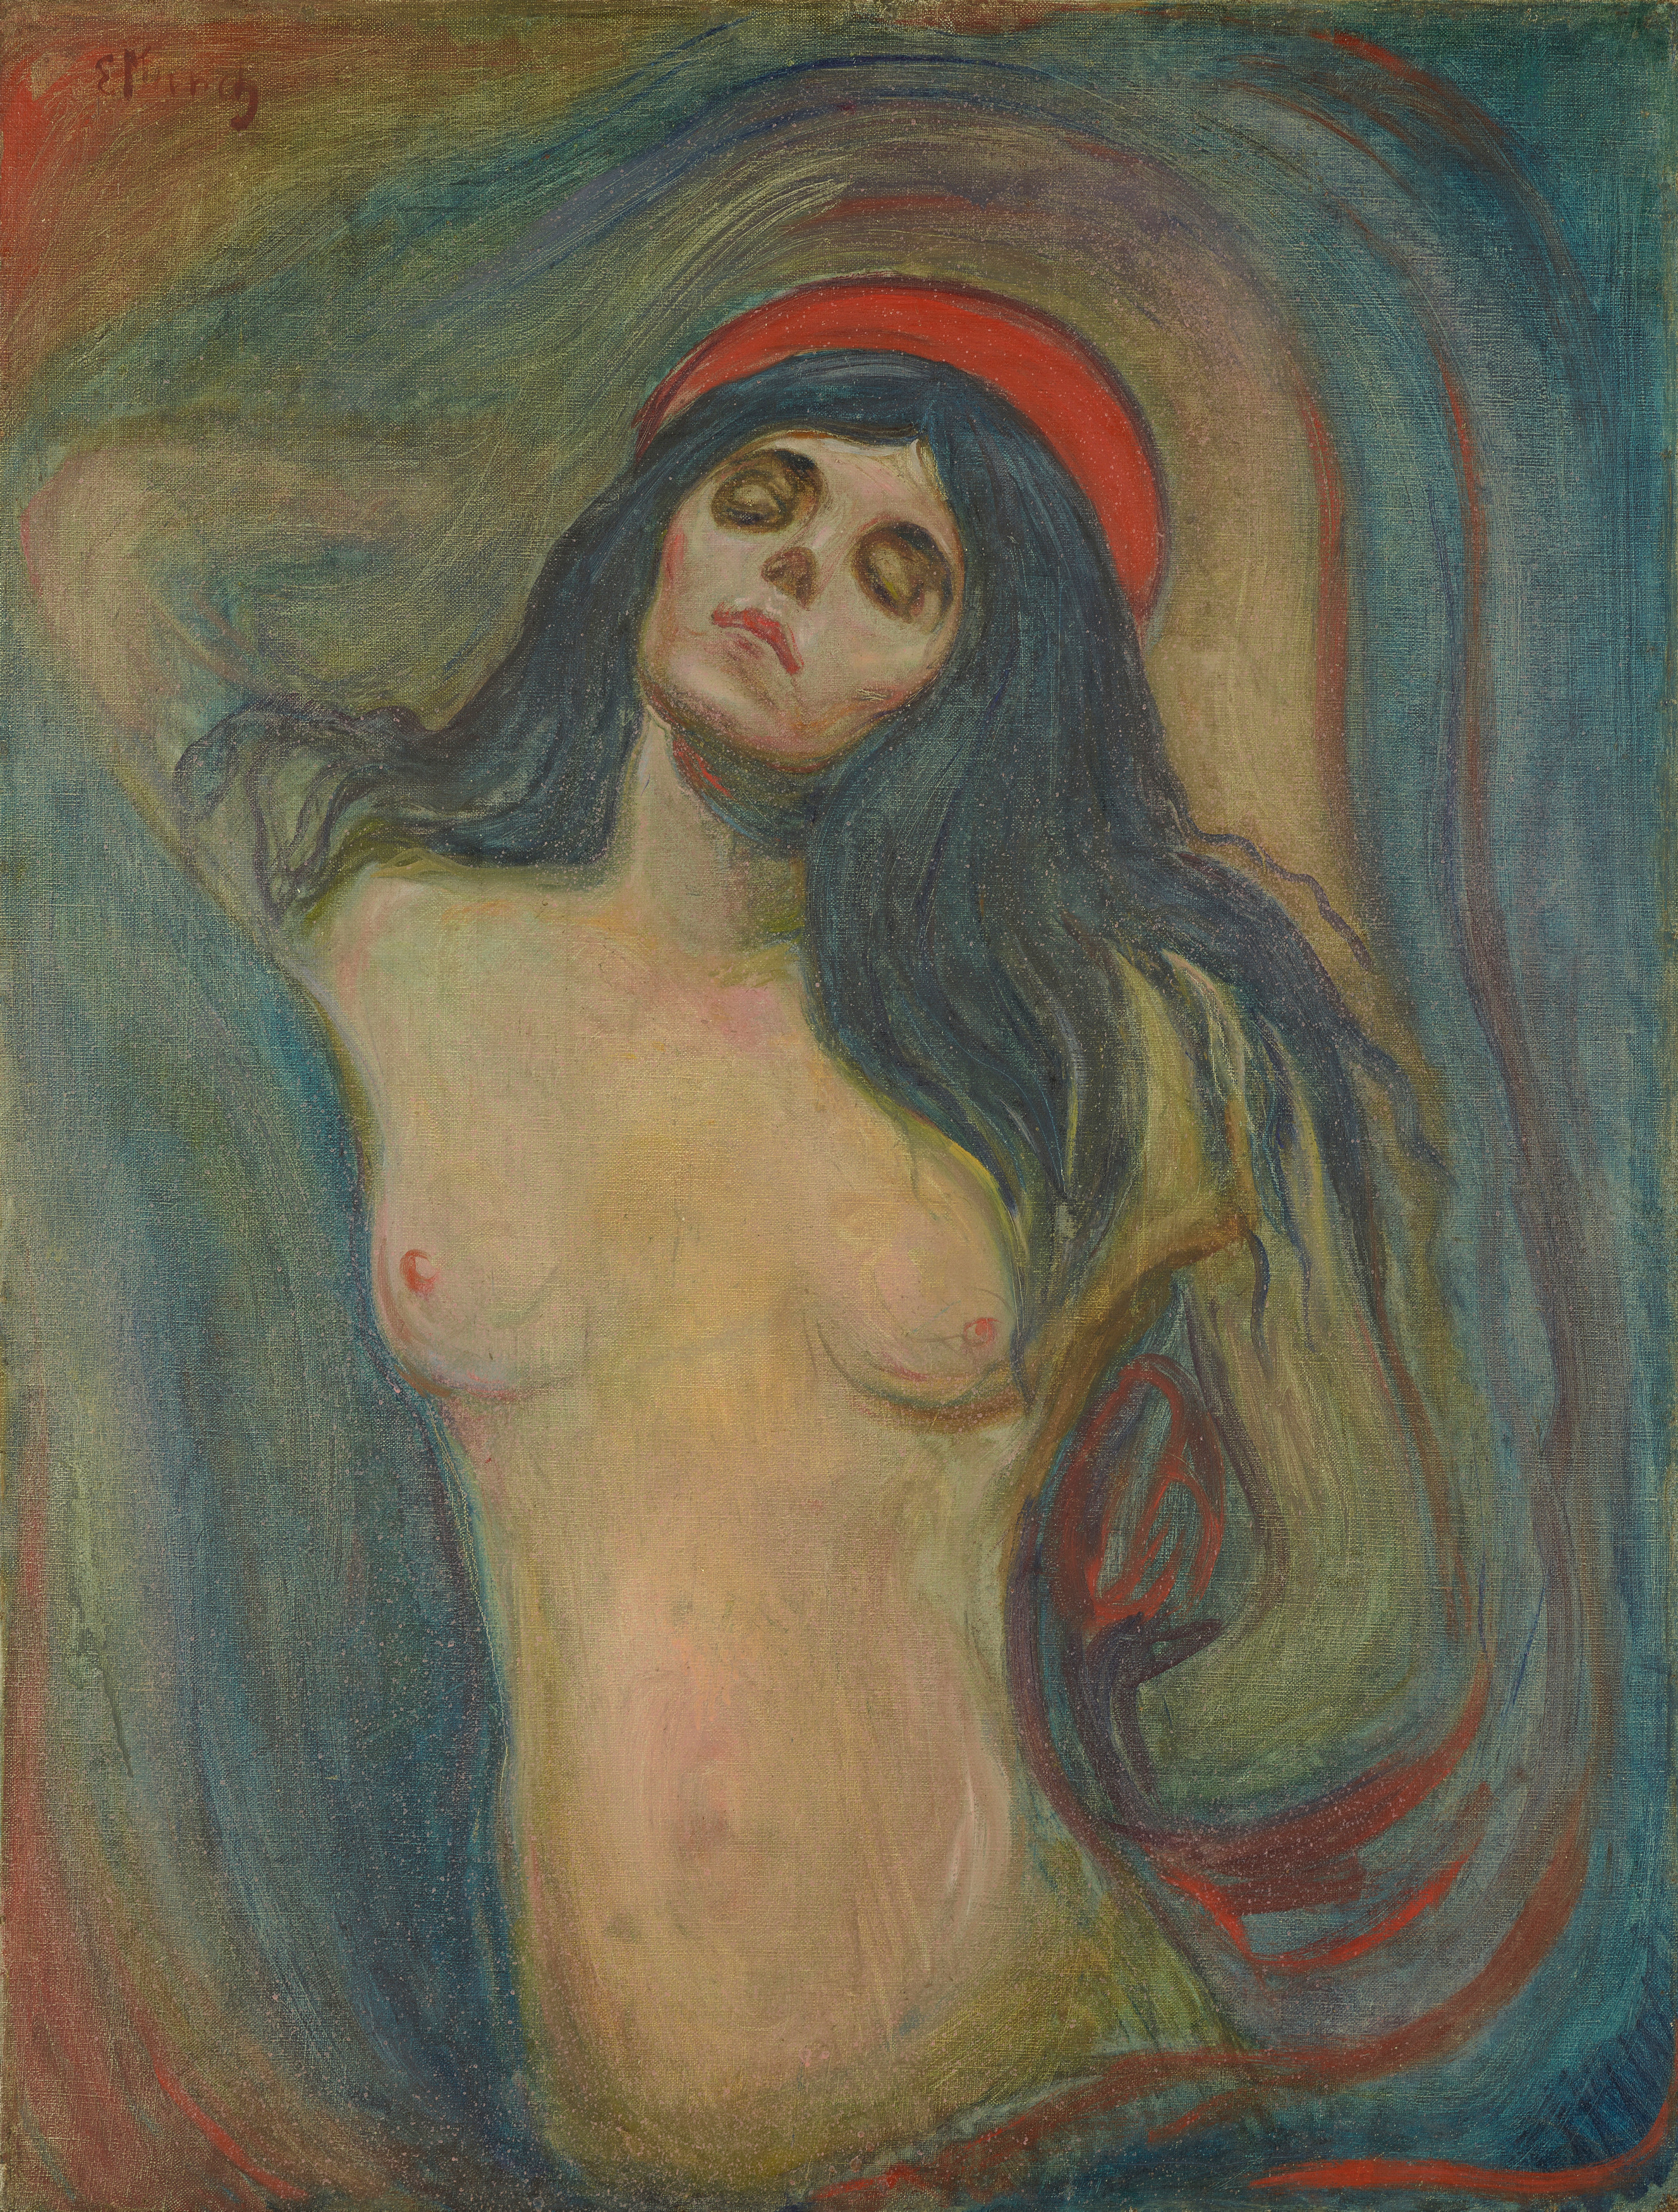 A naked woman shown from the hips up stands or lies against a meandering background. She has one arm raised behind her head and the other resting behind her hips. Her eyes are closed and her face is framed by long, black hair. Behind her head she has a red circle that could be a hat or a halo. 